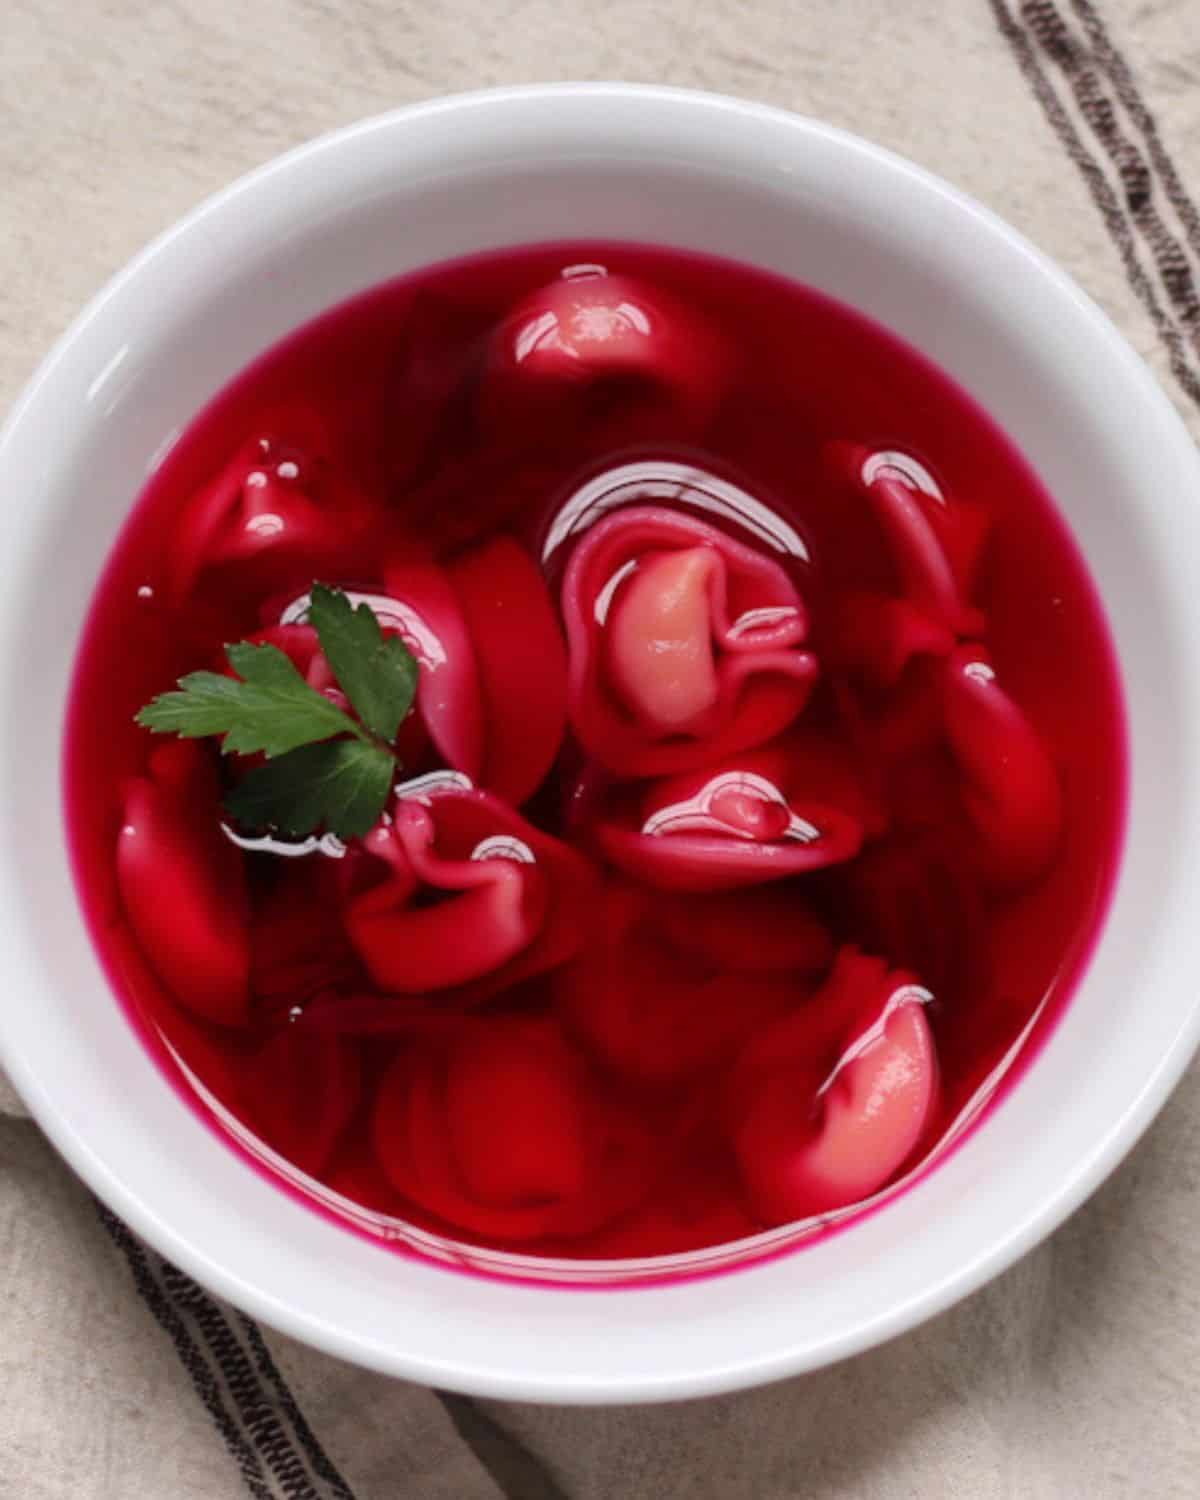 Polish red borscht with mushroom dumplings in a white bowl garnished with some fresh green parsley on top. 